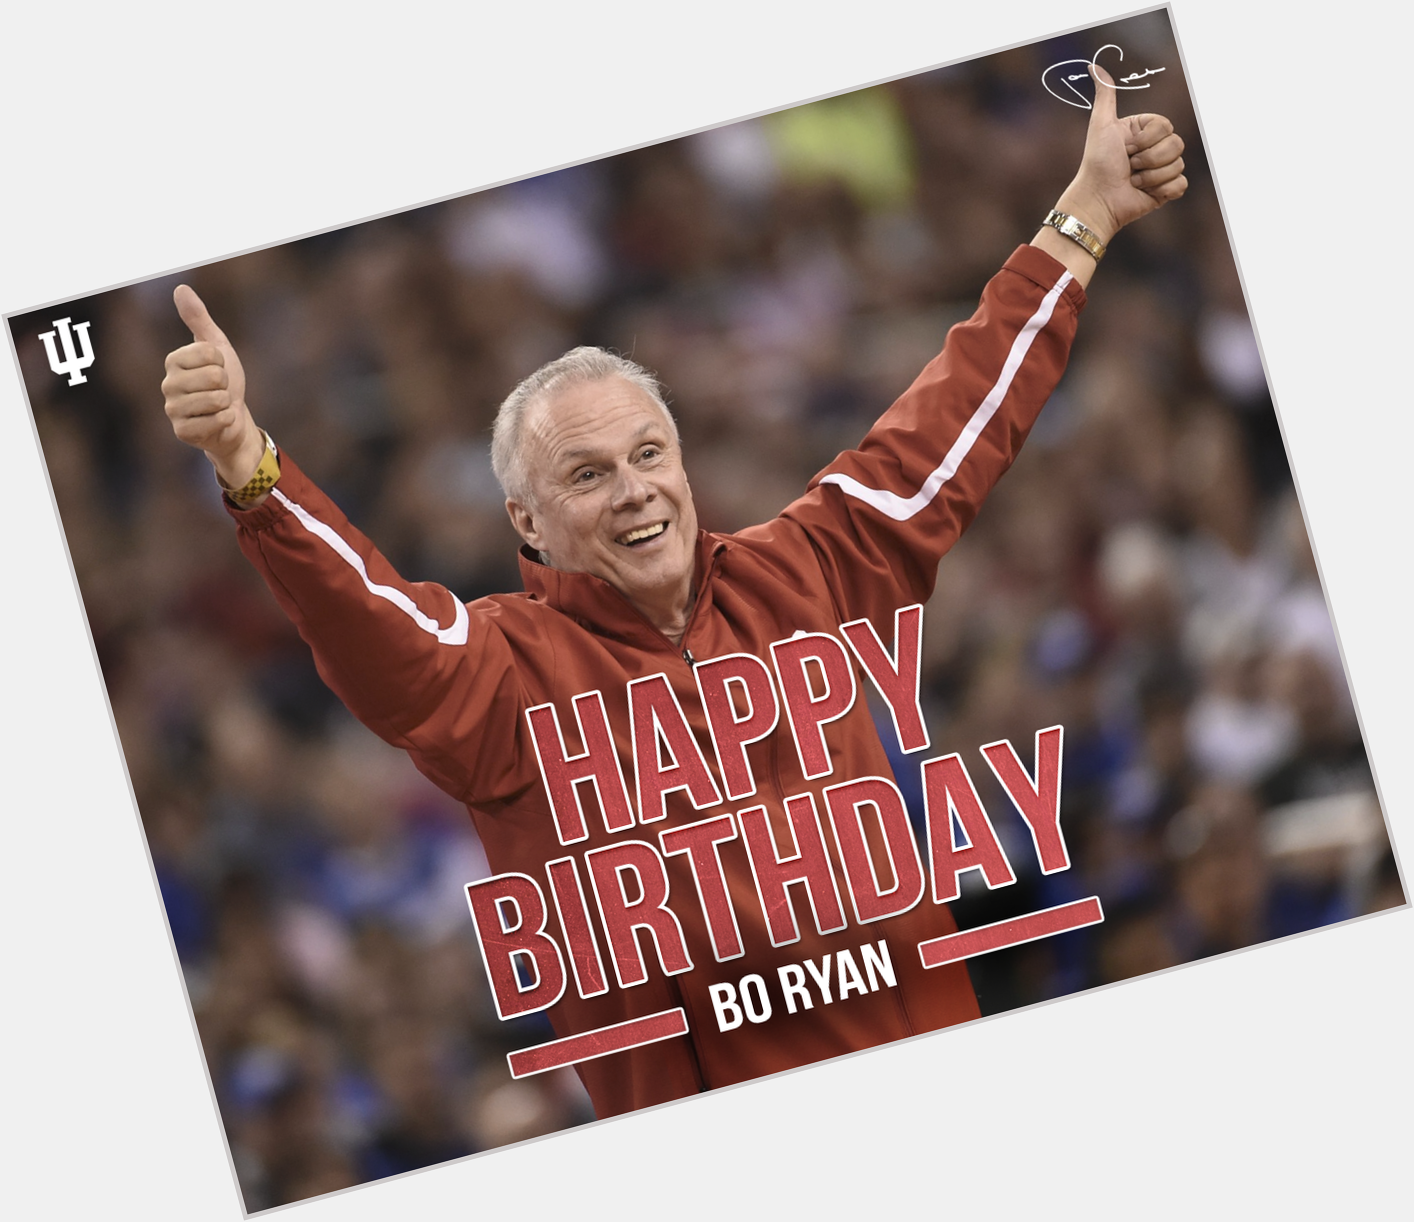 Wishing a happy birthday to Bo Ryan. Congrats on your retirement and a great career! 